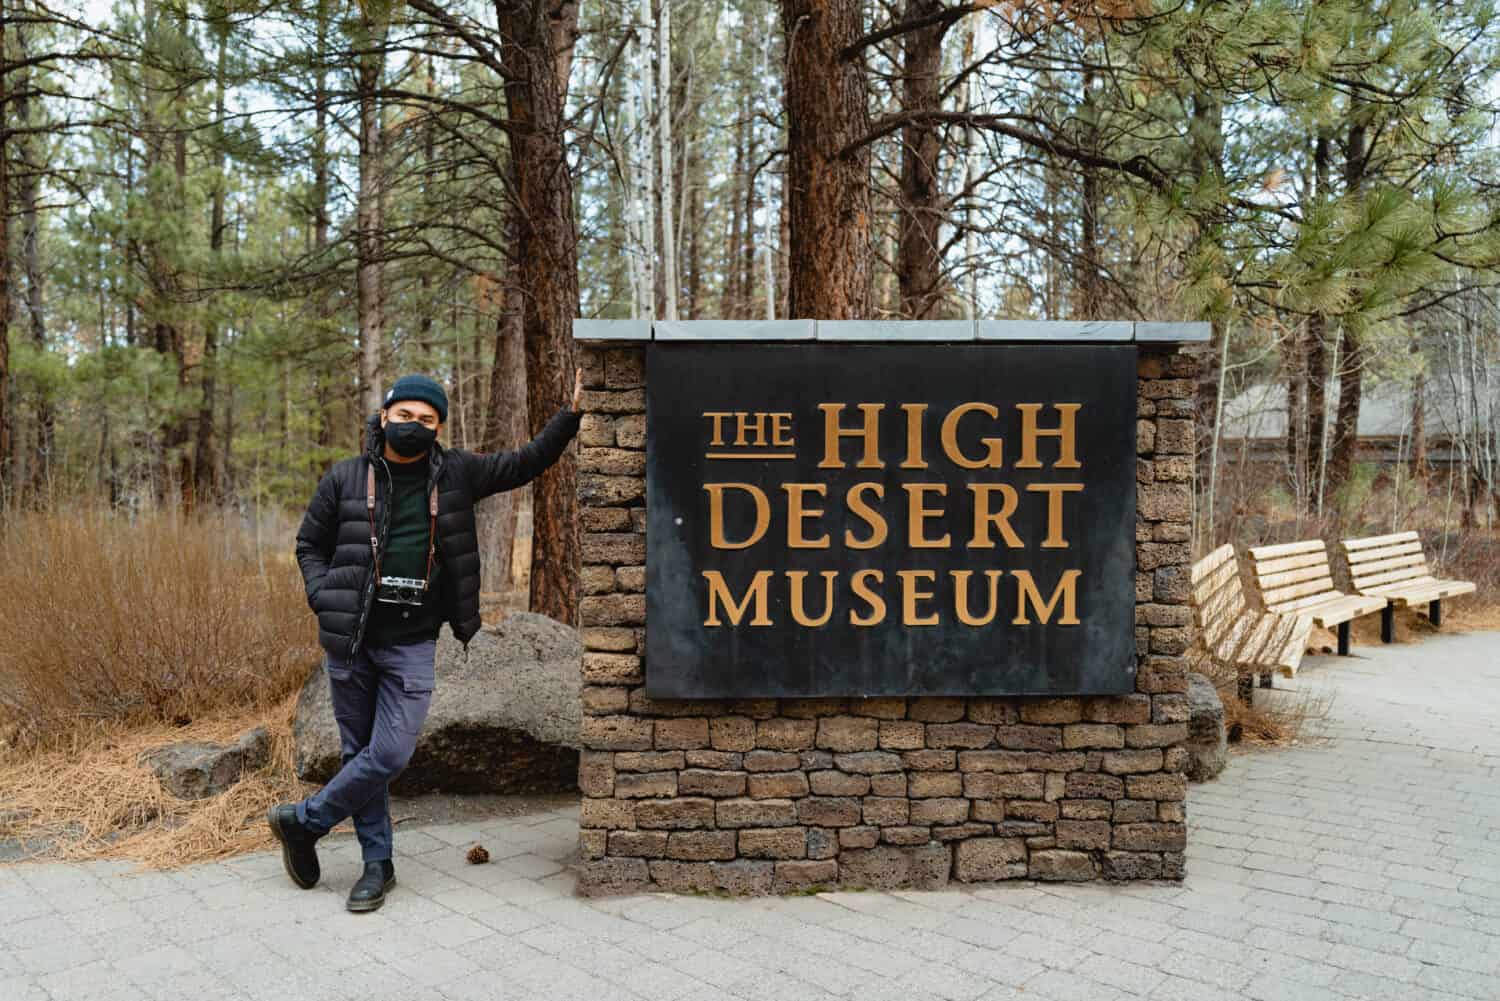 Things To Do In Bend, Oregon - The High Desert Museum